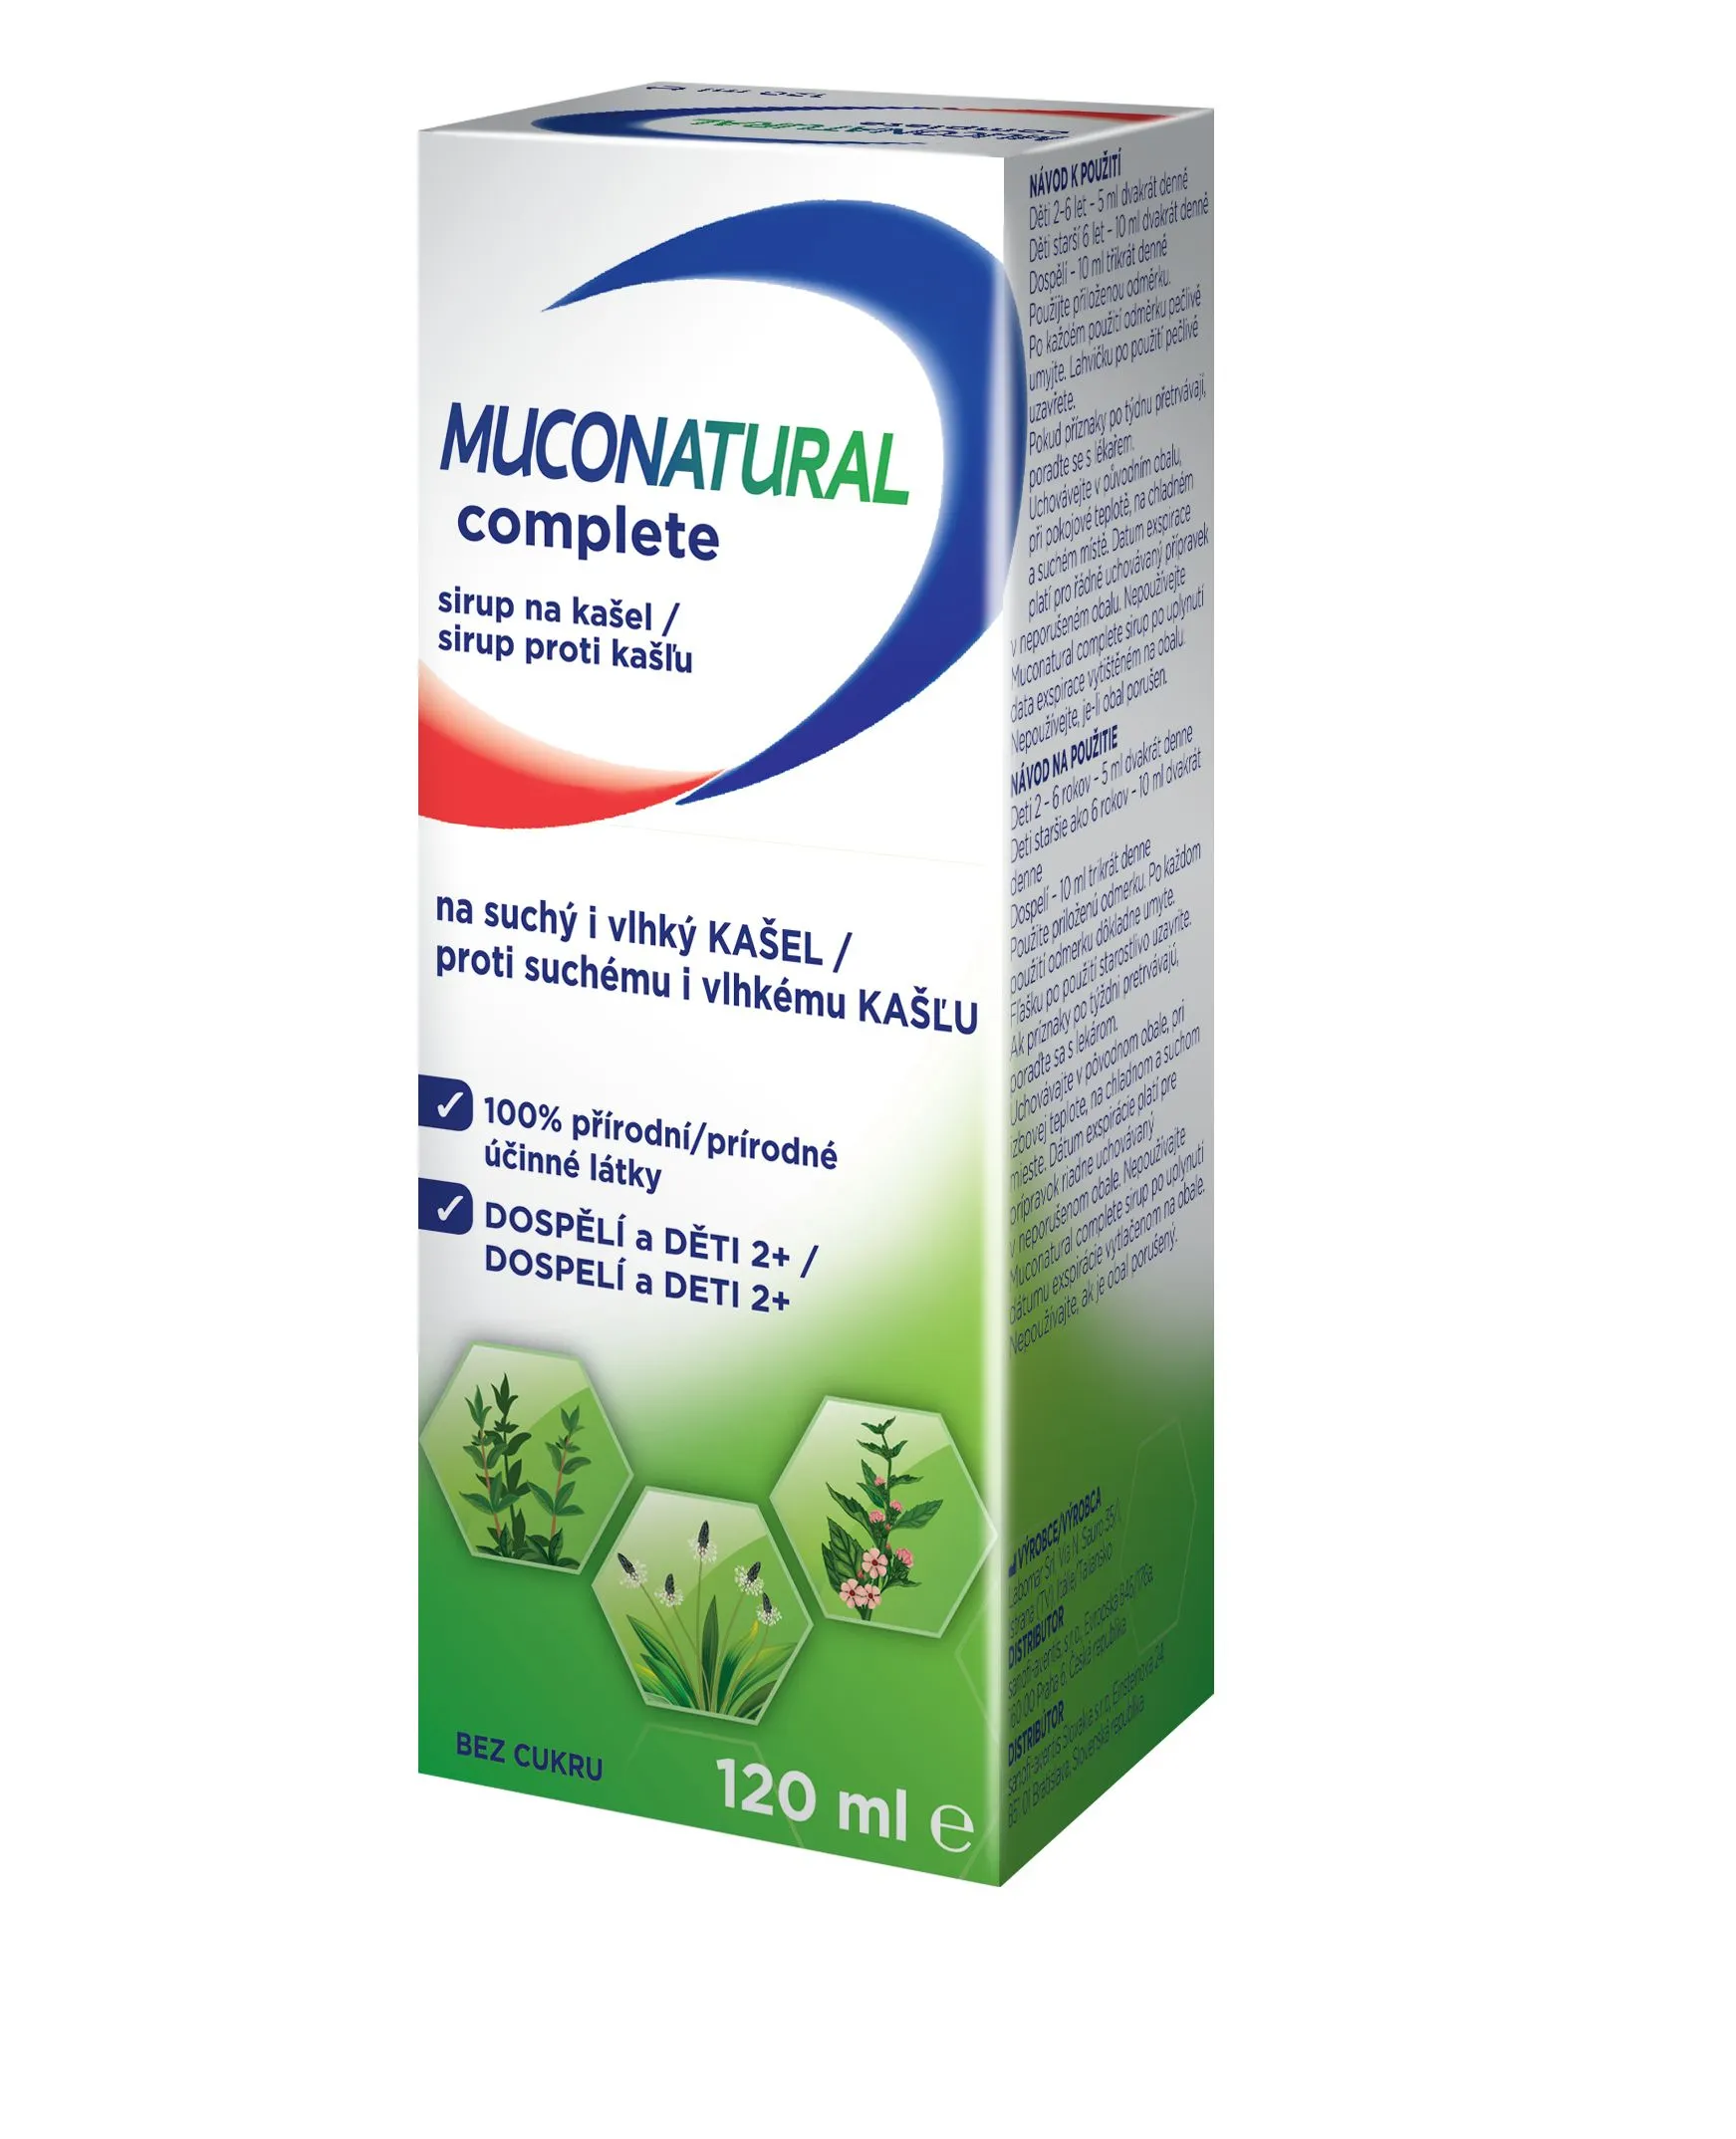 Muconatural complete sirup 120 ml